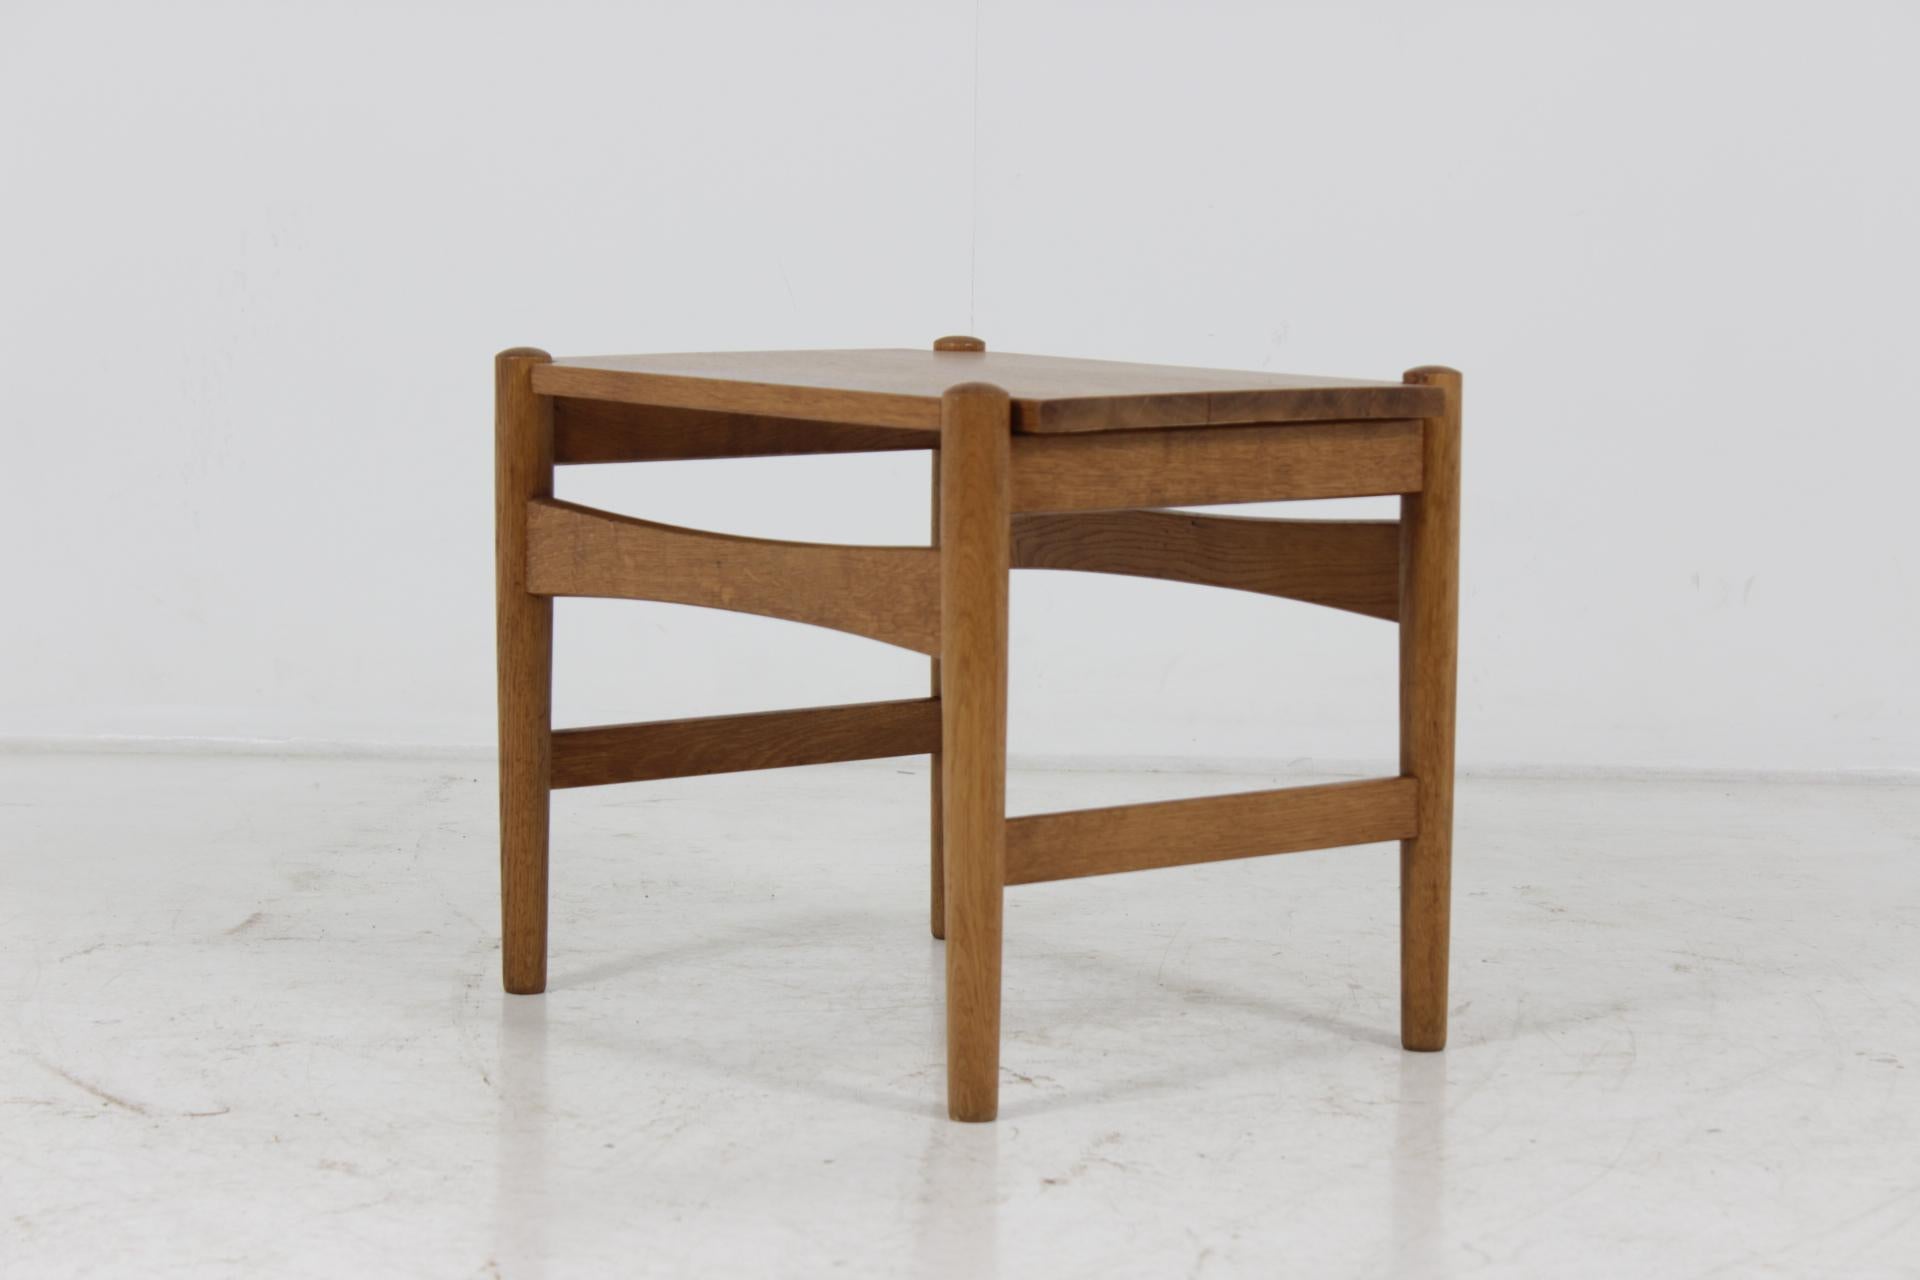 This midcentury oak side table, model AT 50, was designed by Hans J. Wegner for Andreas Tuck in the 1970s in Denmark. The Table is made of solid oak and features one removable plate. Carefully refurbished.